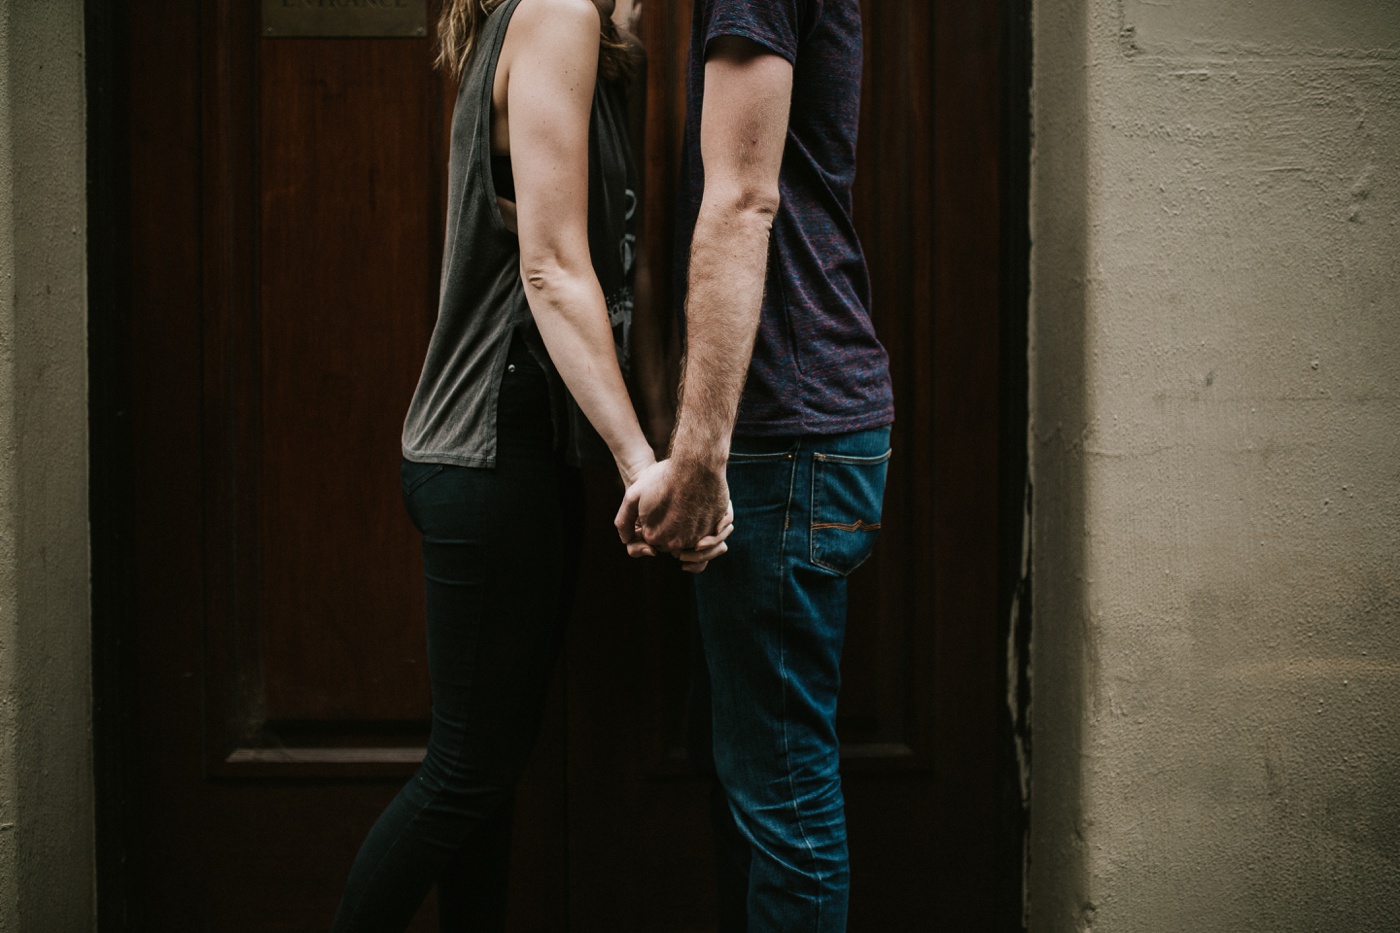 heli-alex_melbourne-fun-candid-gritty-relaxed-city-urban-couples-engagement-session_melbourne-wedding-photography_4